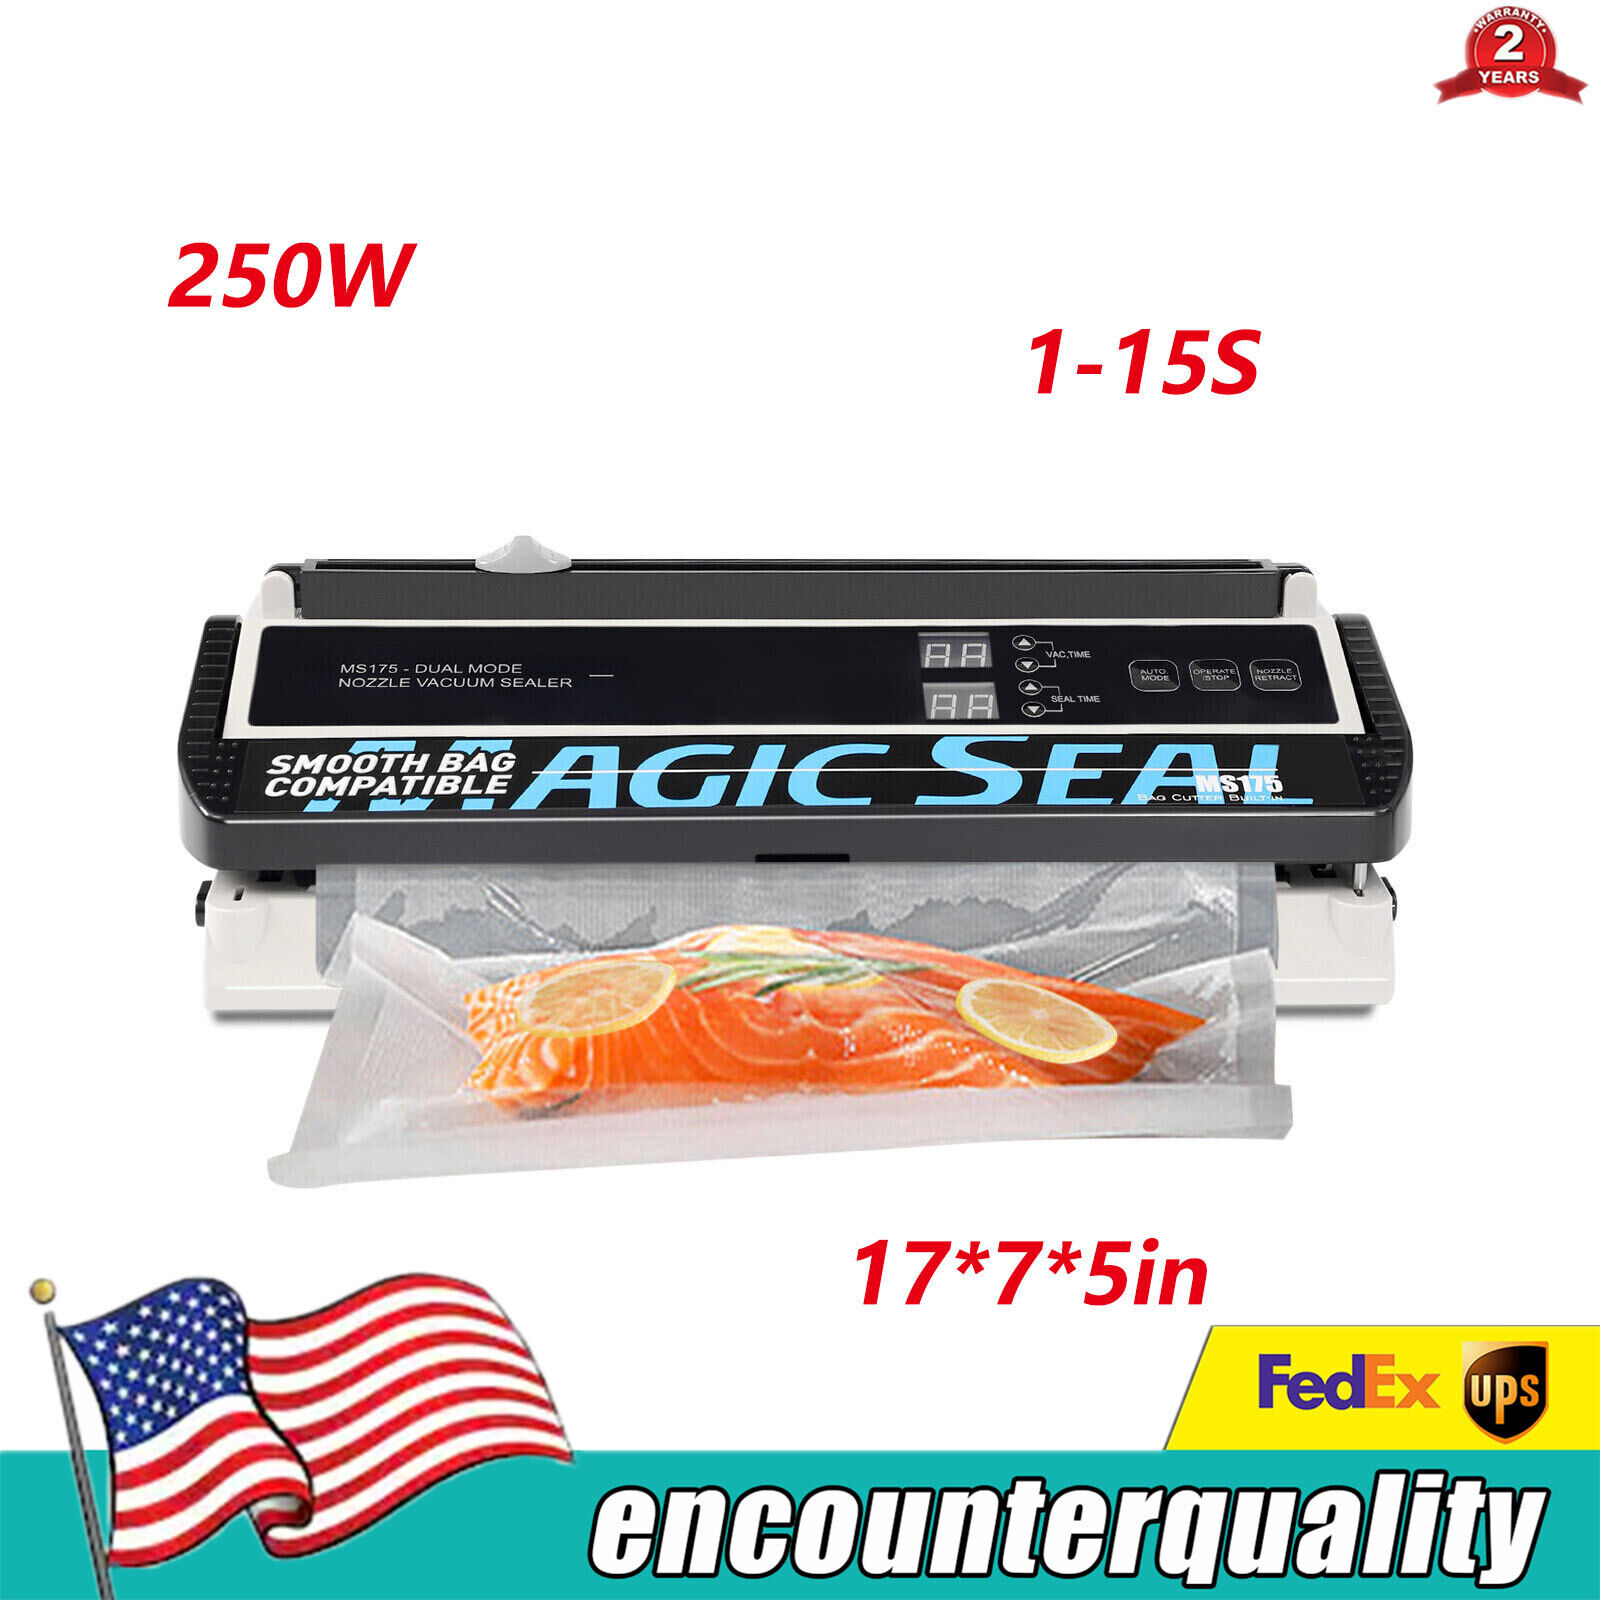 250W Vacuum Sealer Machine For Food Savers, Automatic & Manual Mode, Nozzle Type Unbranded Does not apply